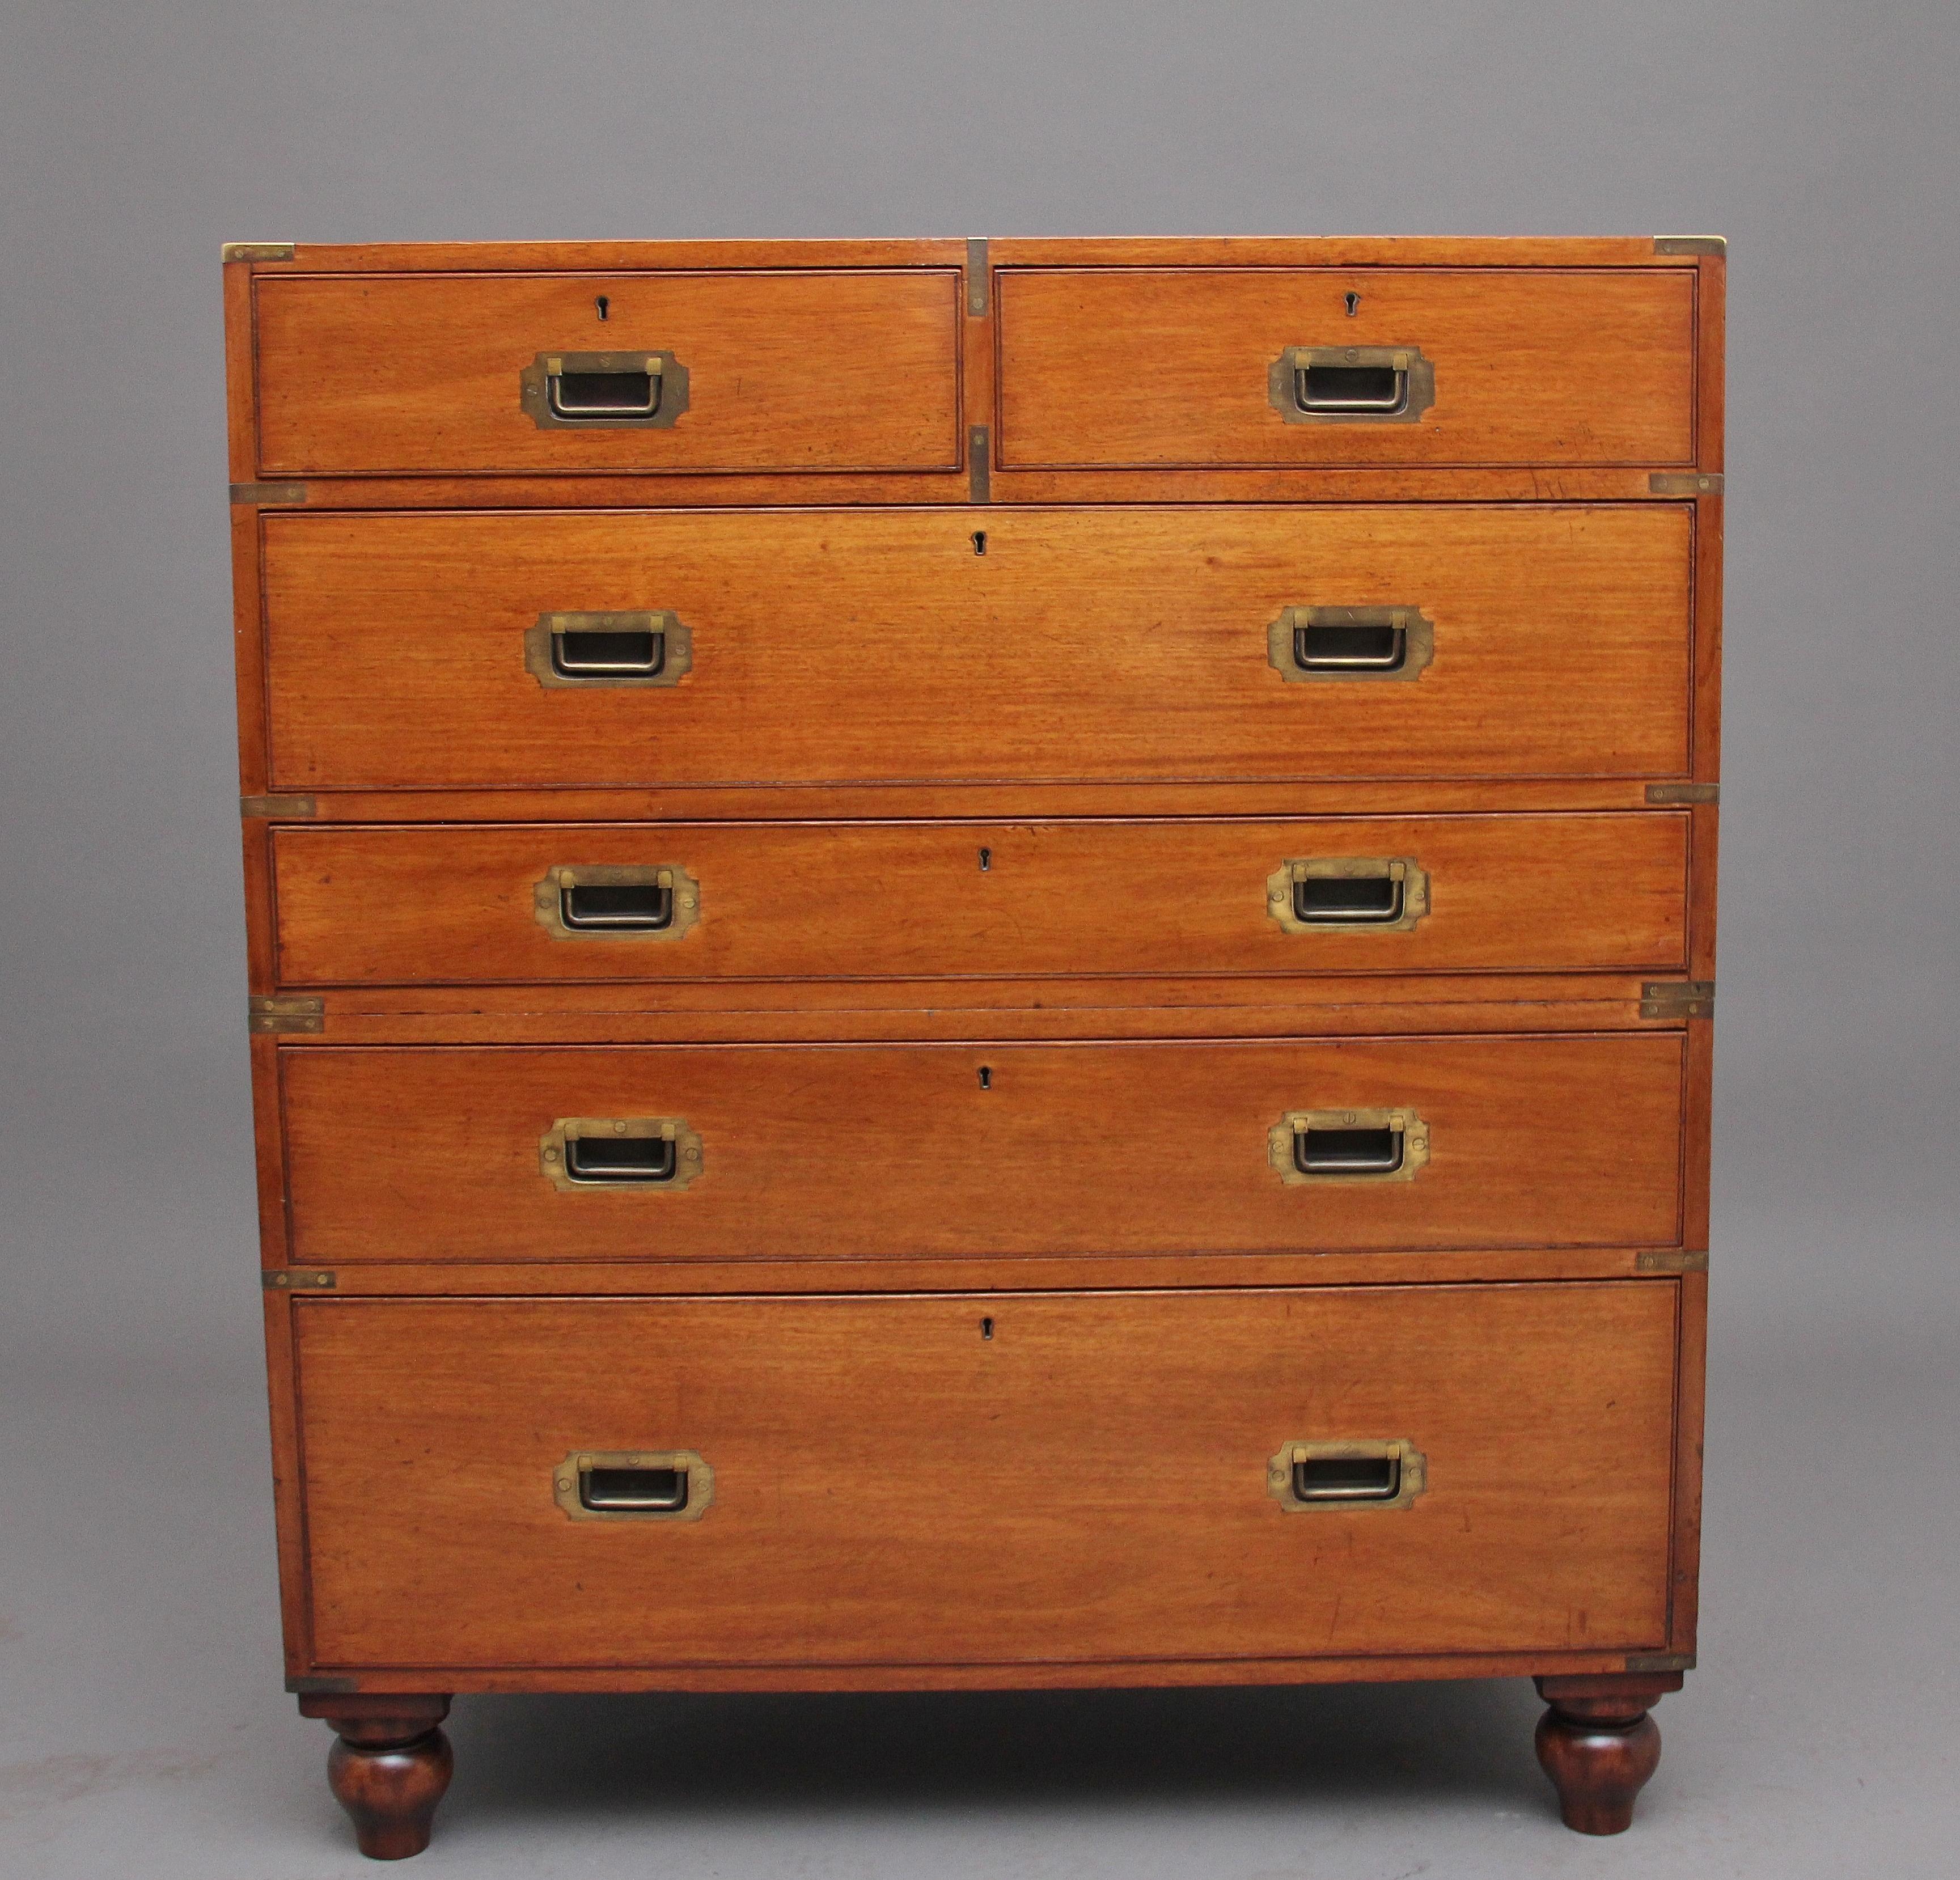 19th century mahogany military secrétaire chest, having a combination of two short over four long mahogany lined drawers with original brass recessed handles, the middle drawer pulls out to reveal a lovely quality secrétaire drawer with various